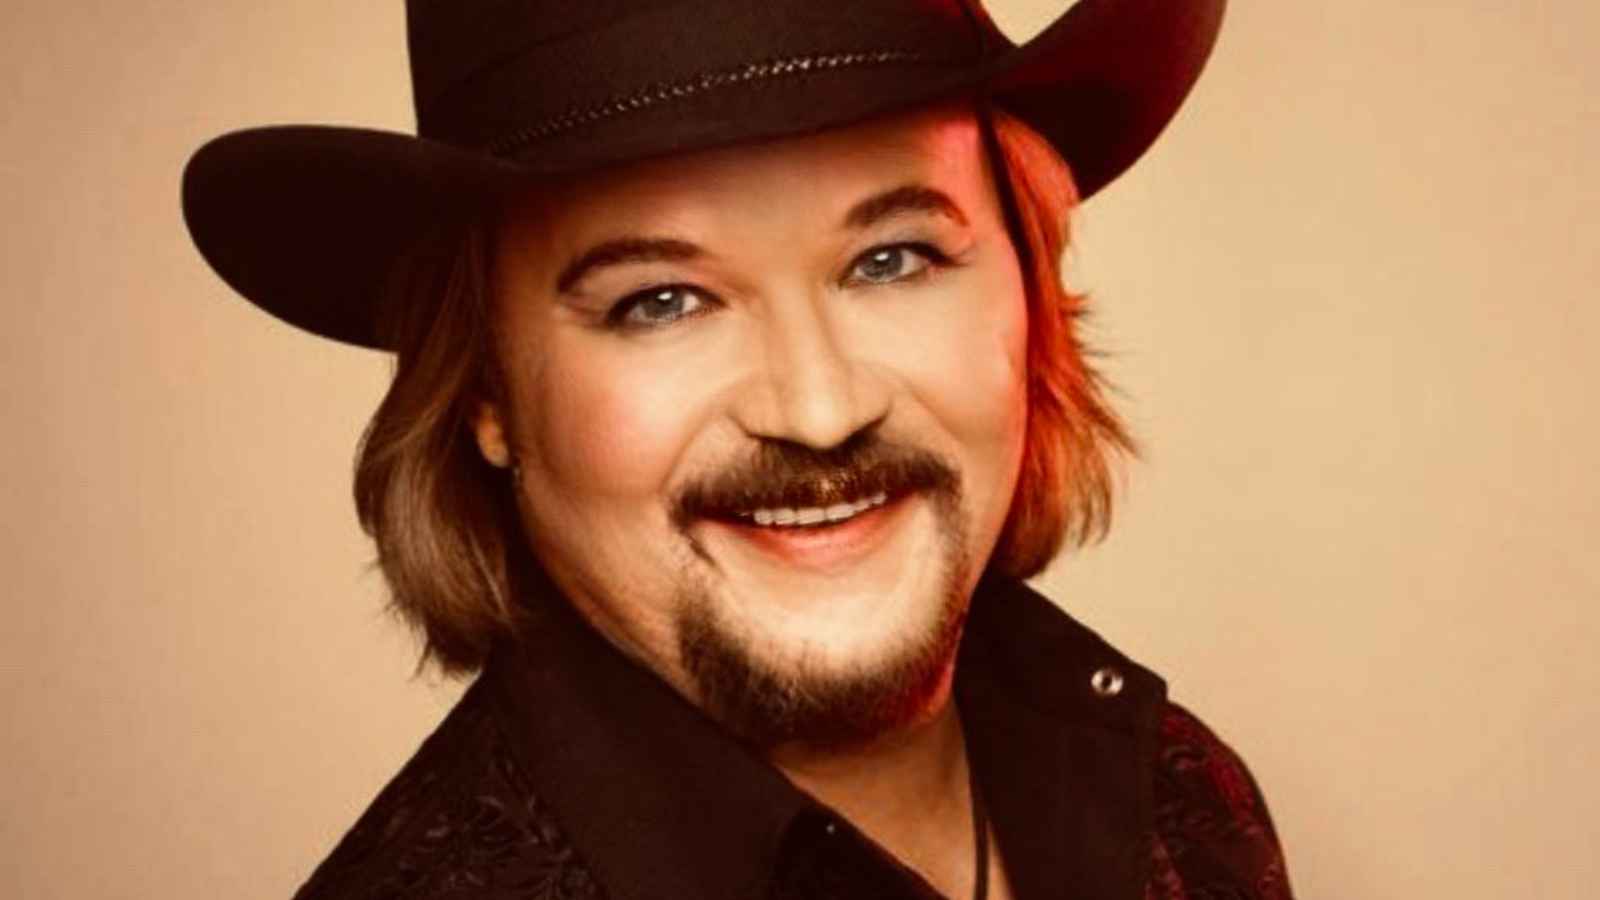 Travis Tritt Plastic Surgery: What Happened In The Singer's Life?